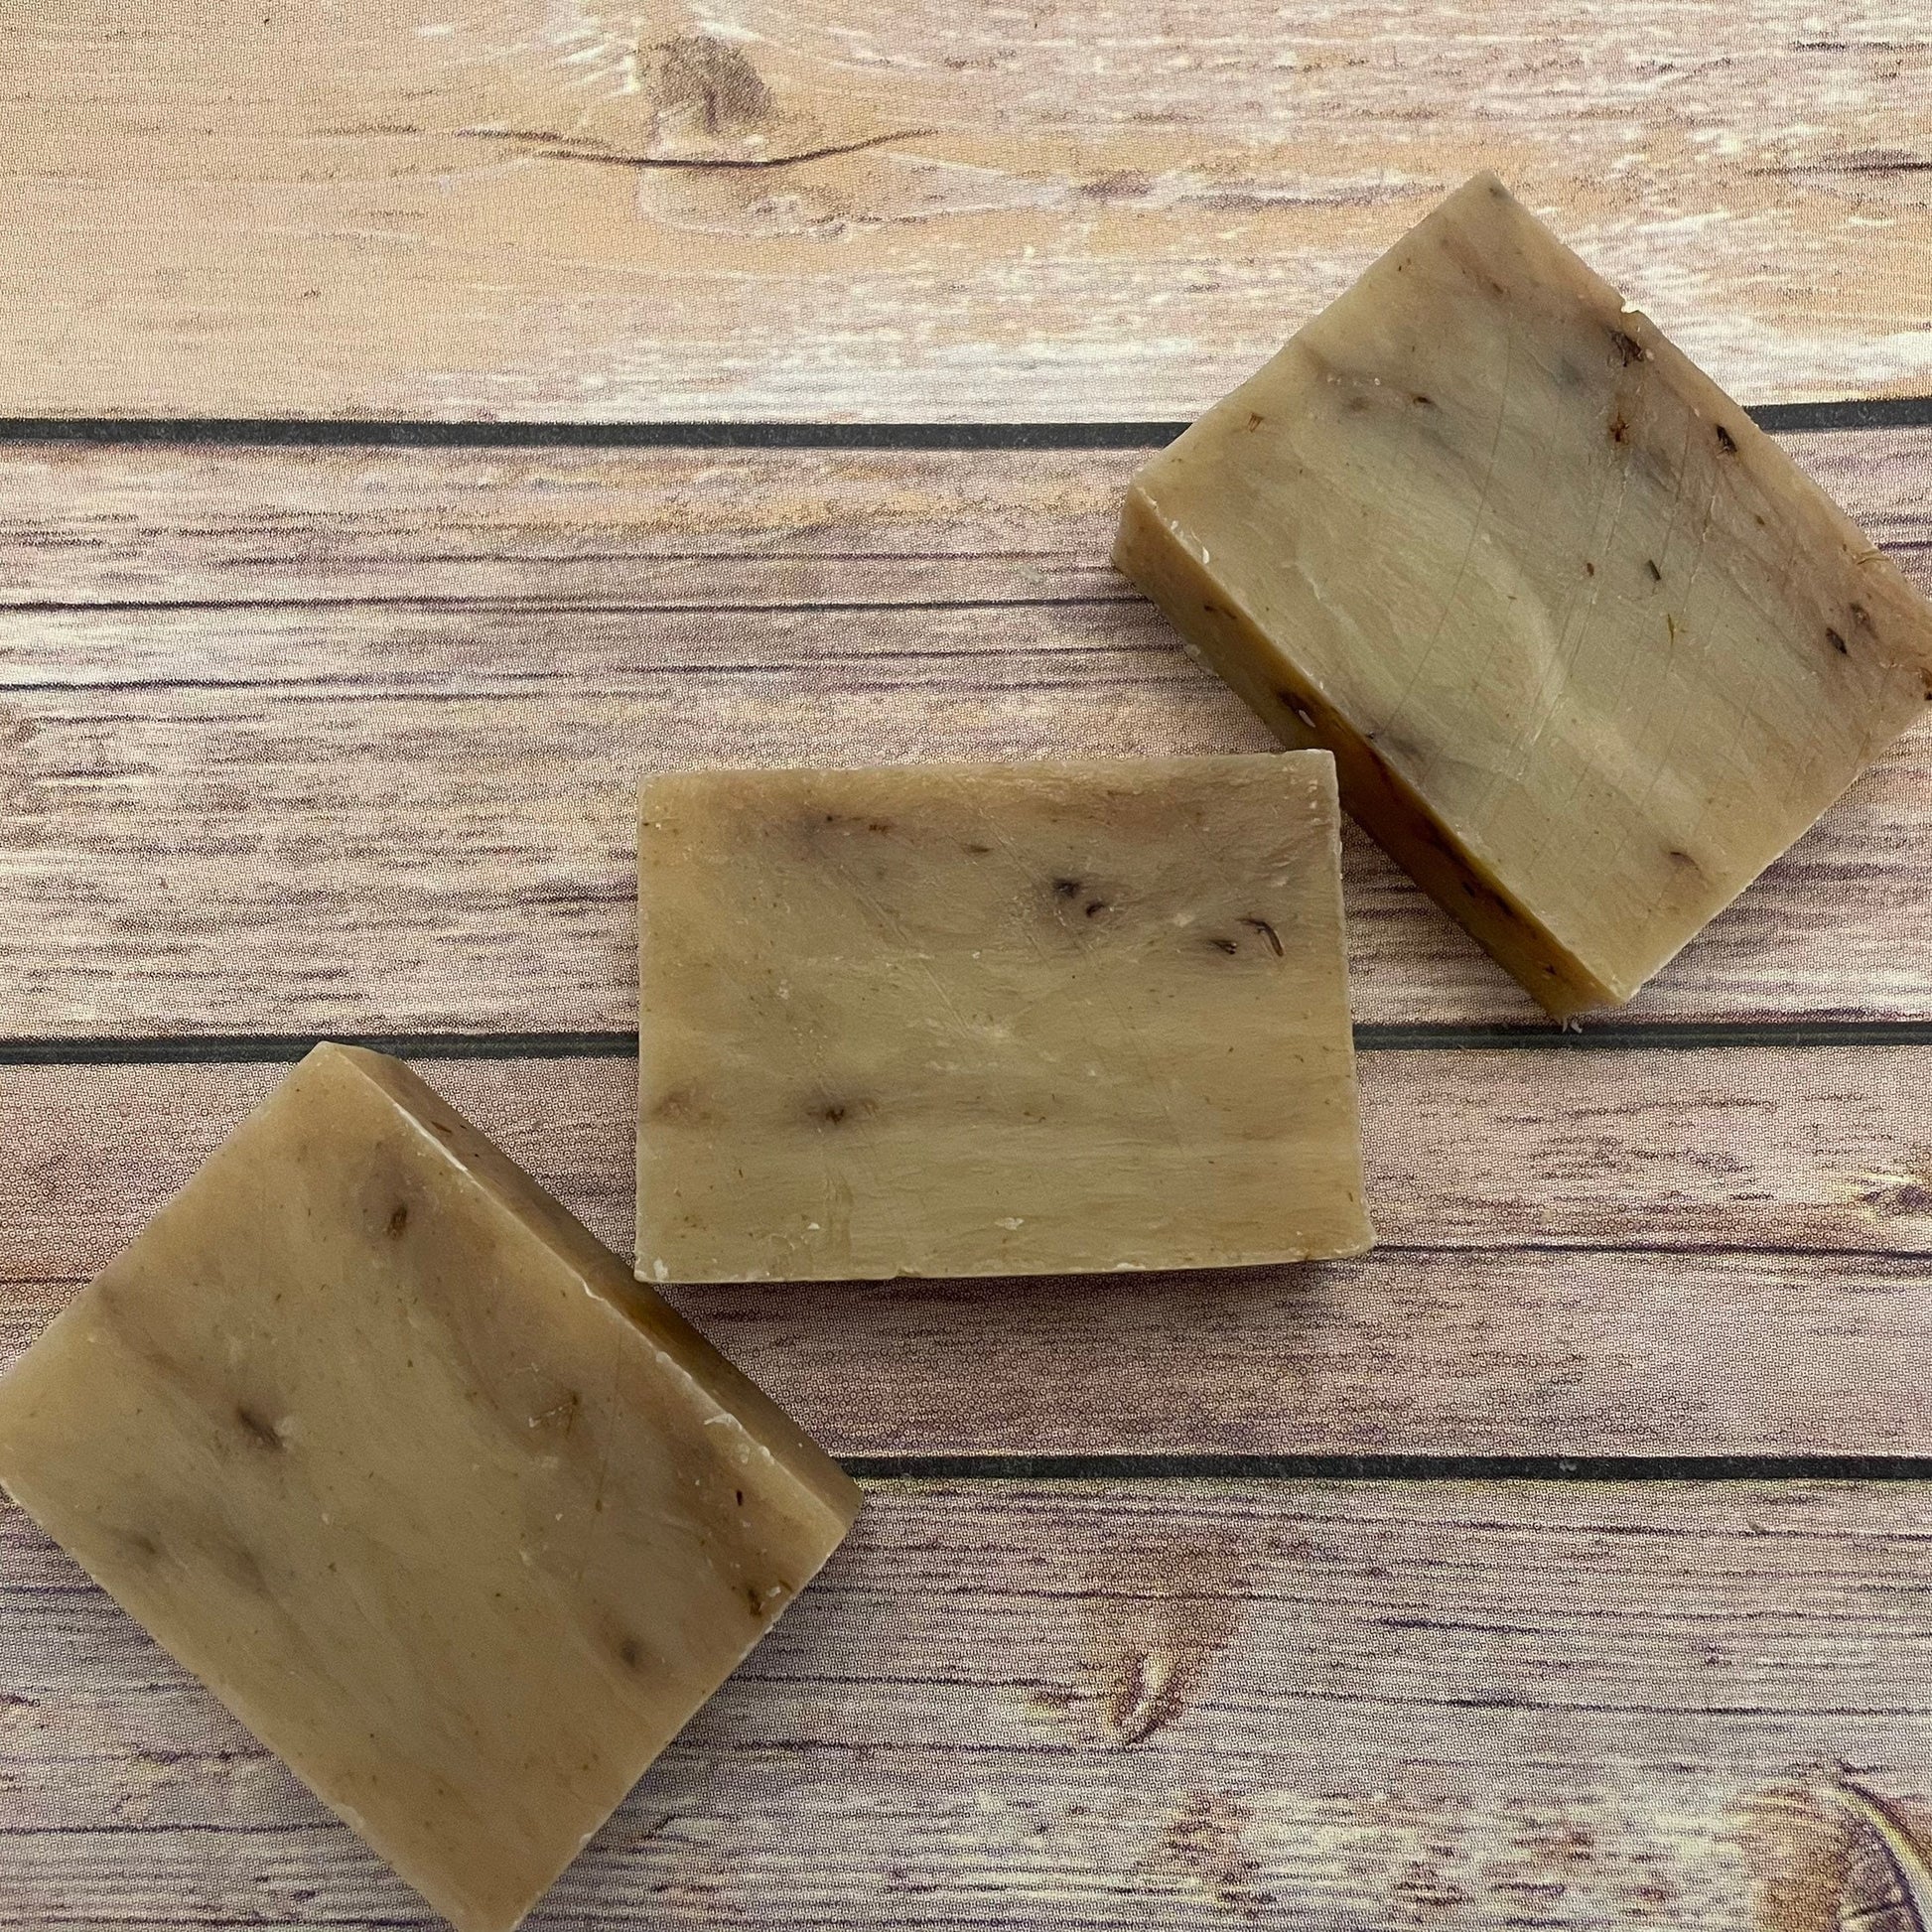 Ivy Creek Mountain Man Bar Soap | Natural Organic Soap | 4 oz | Masculine Soap | Outdoor Soap | Gifts for Him